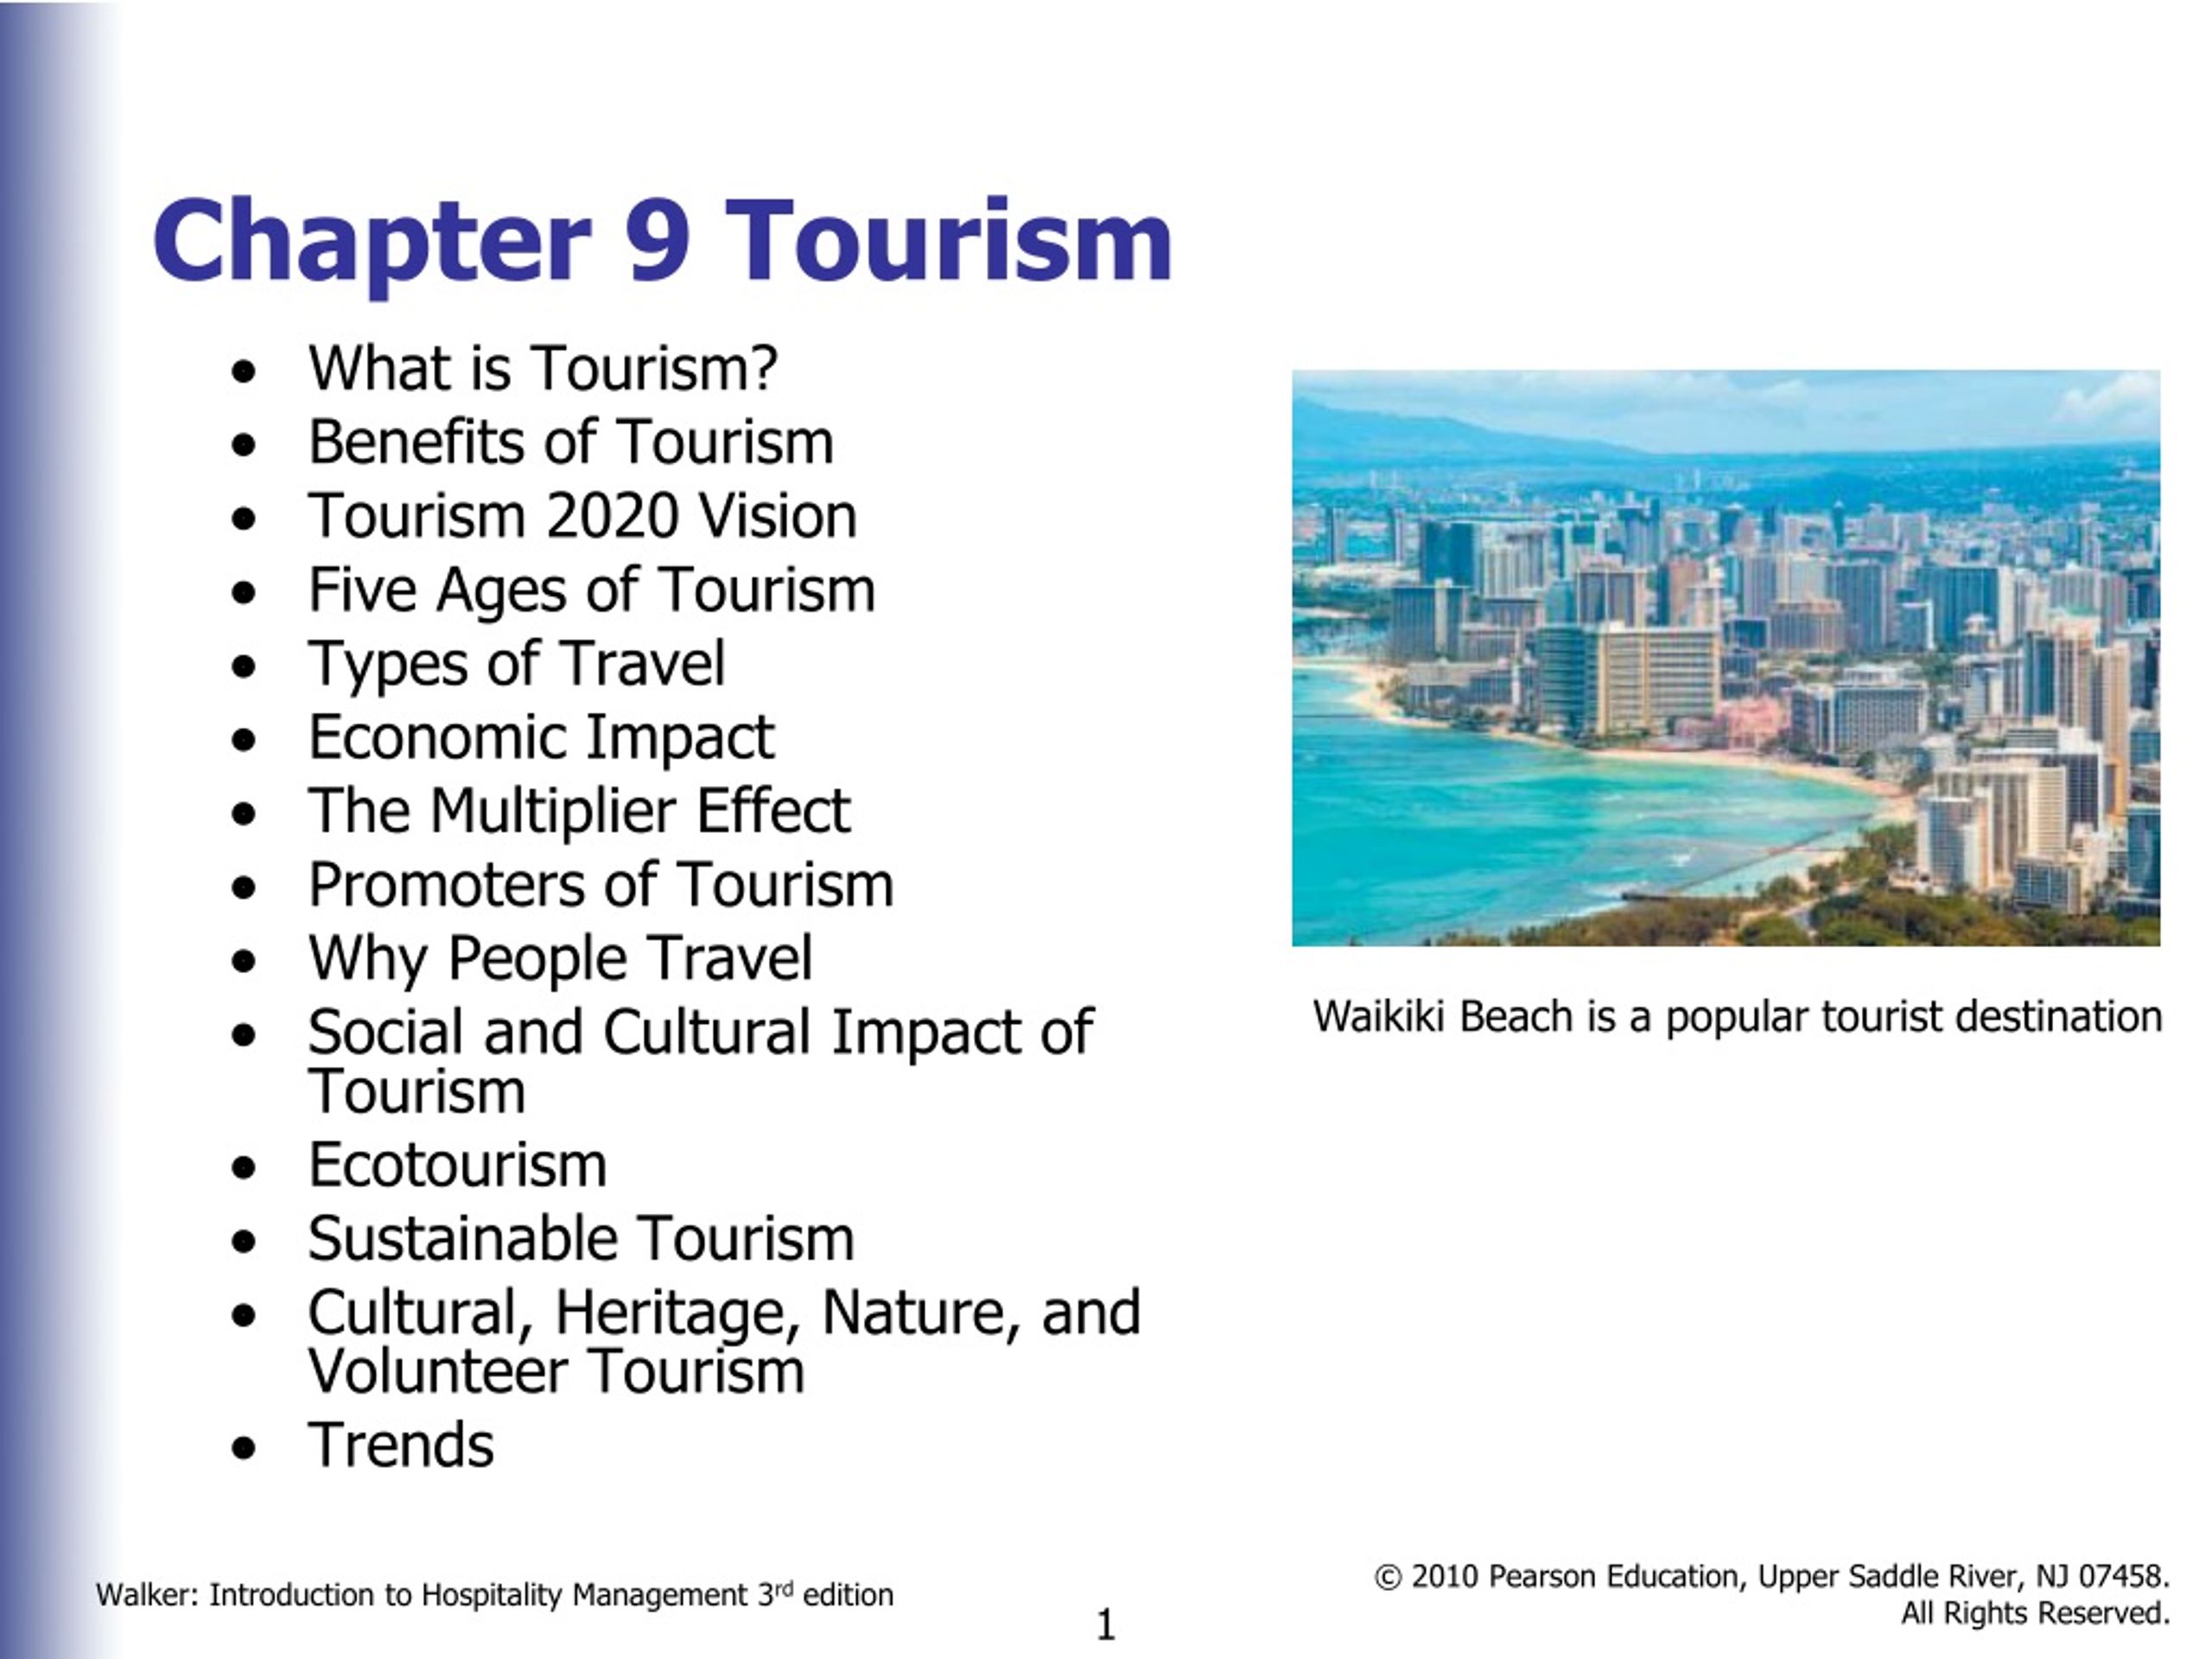 research topics related to tourism